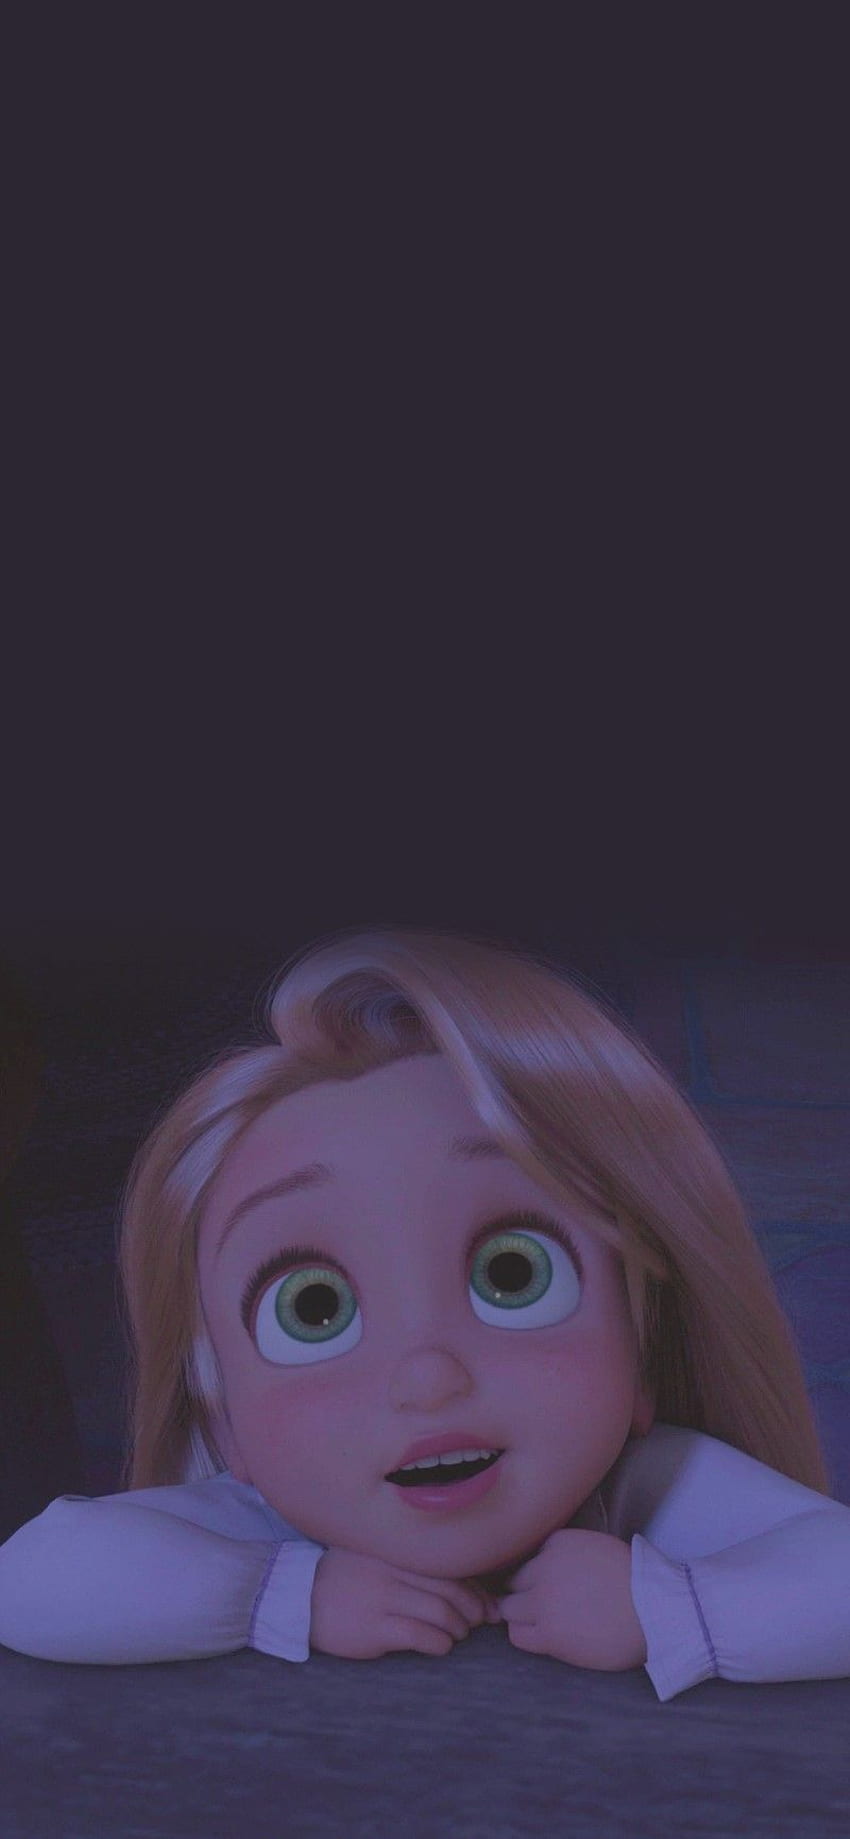 Rapunzel from Tangled looking up with a scared expression - Rapunzel